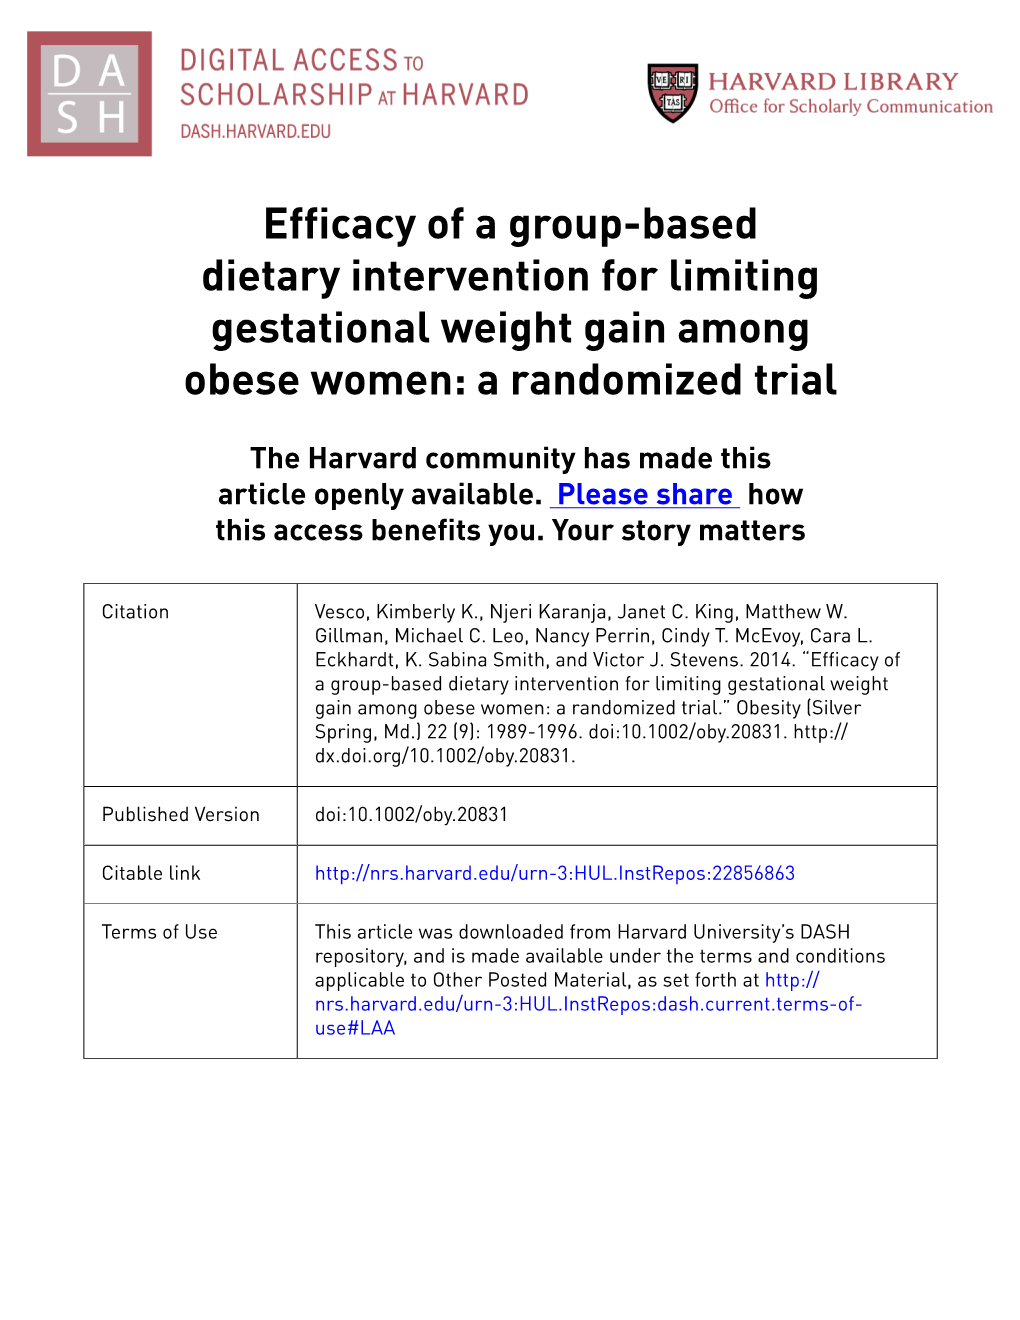 Efficacy of a Group-Based Dietary Intervention for Limiting Gestational Weight Gain Among Obese Women: a Randomized Trial